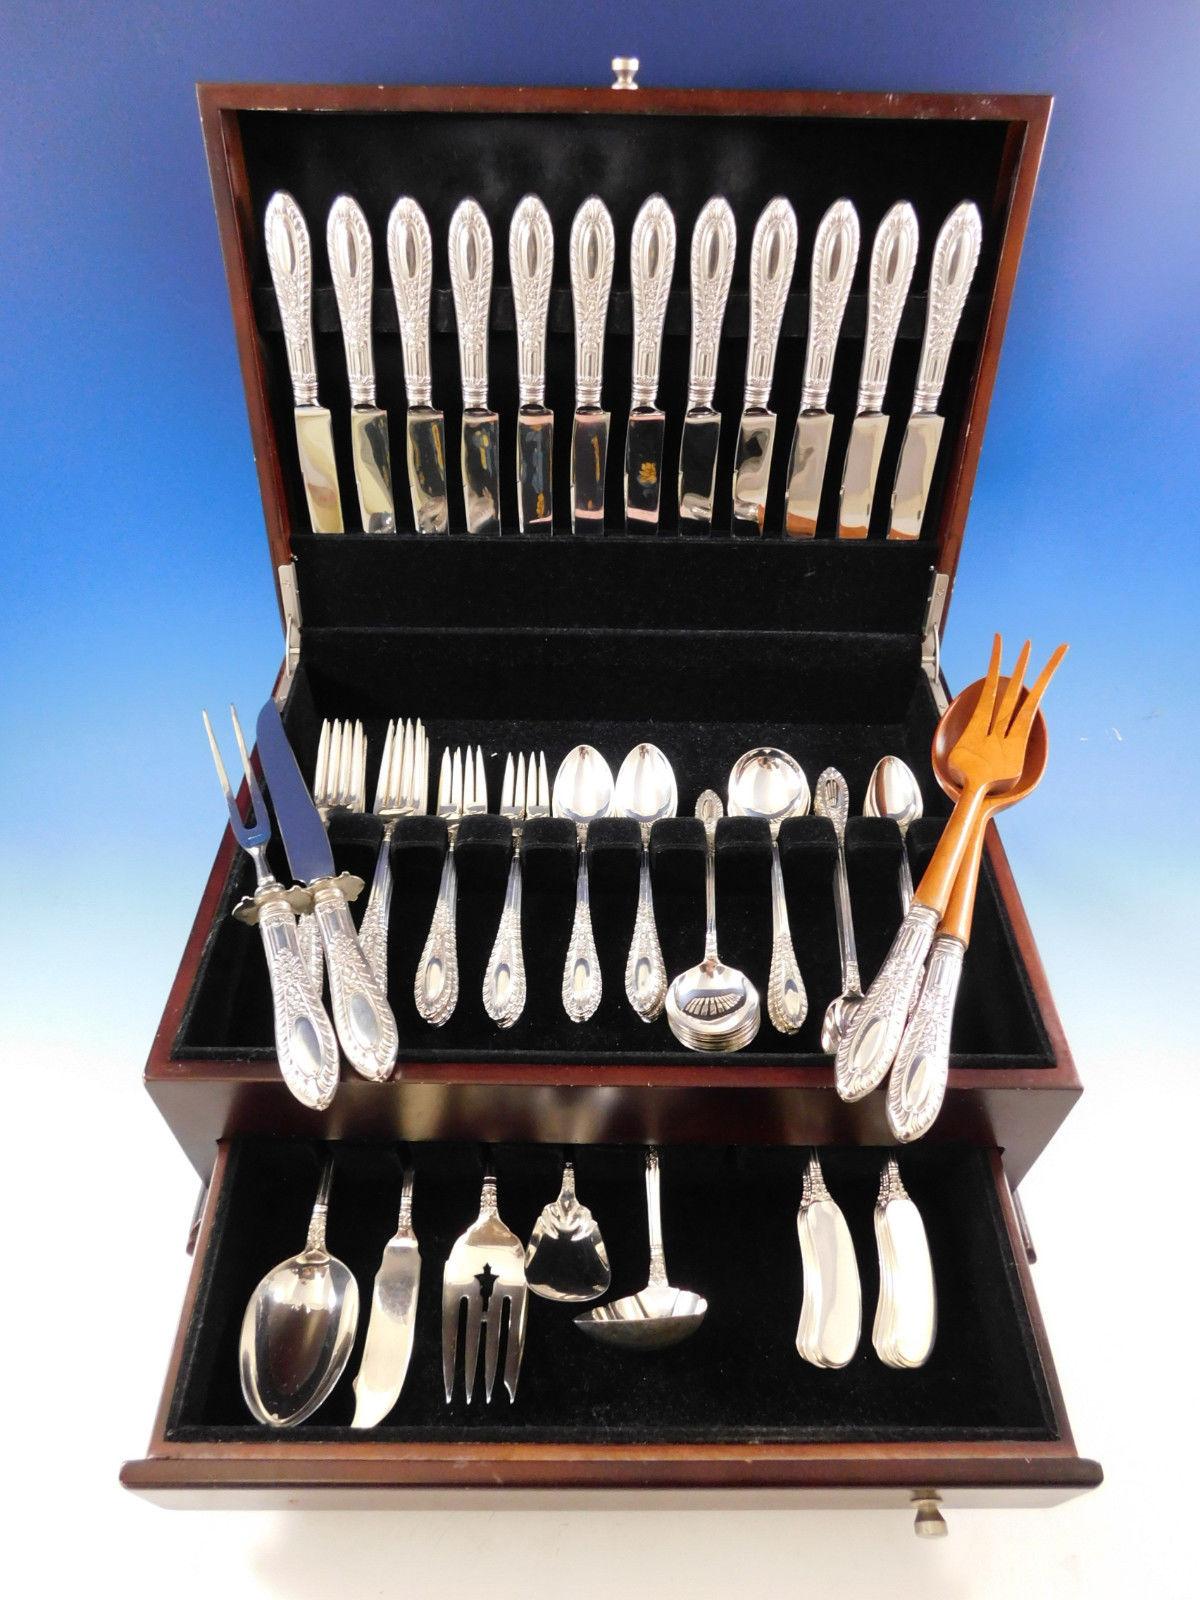 Monumental Gadroonette by Manchester (c1938) sterling silver flatware set of 108 pieces. This set includes:

12 knives, 9